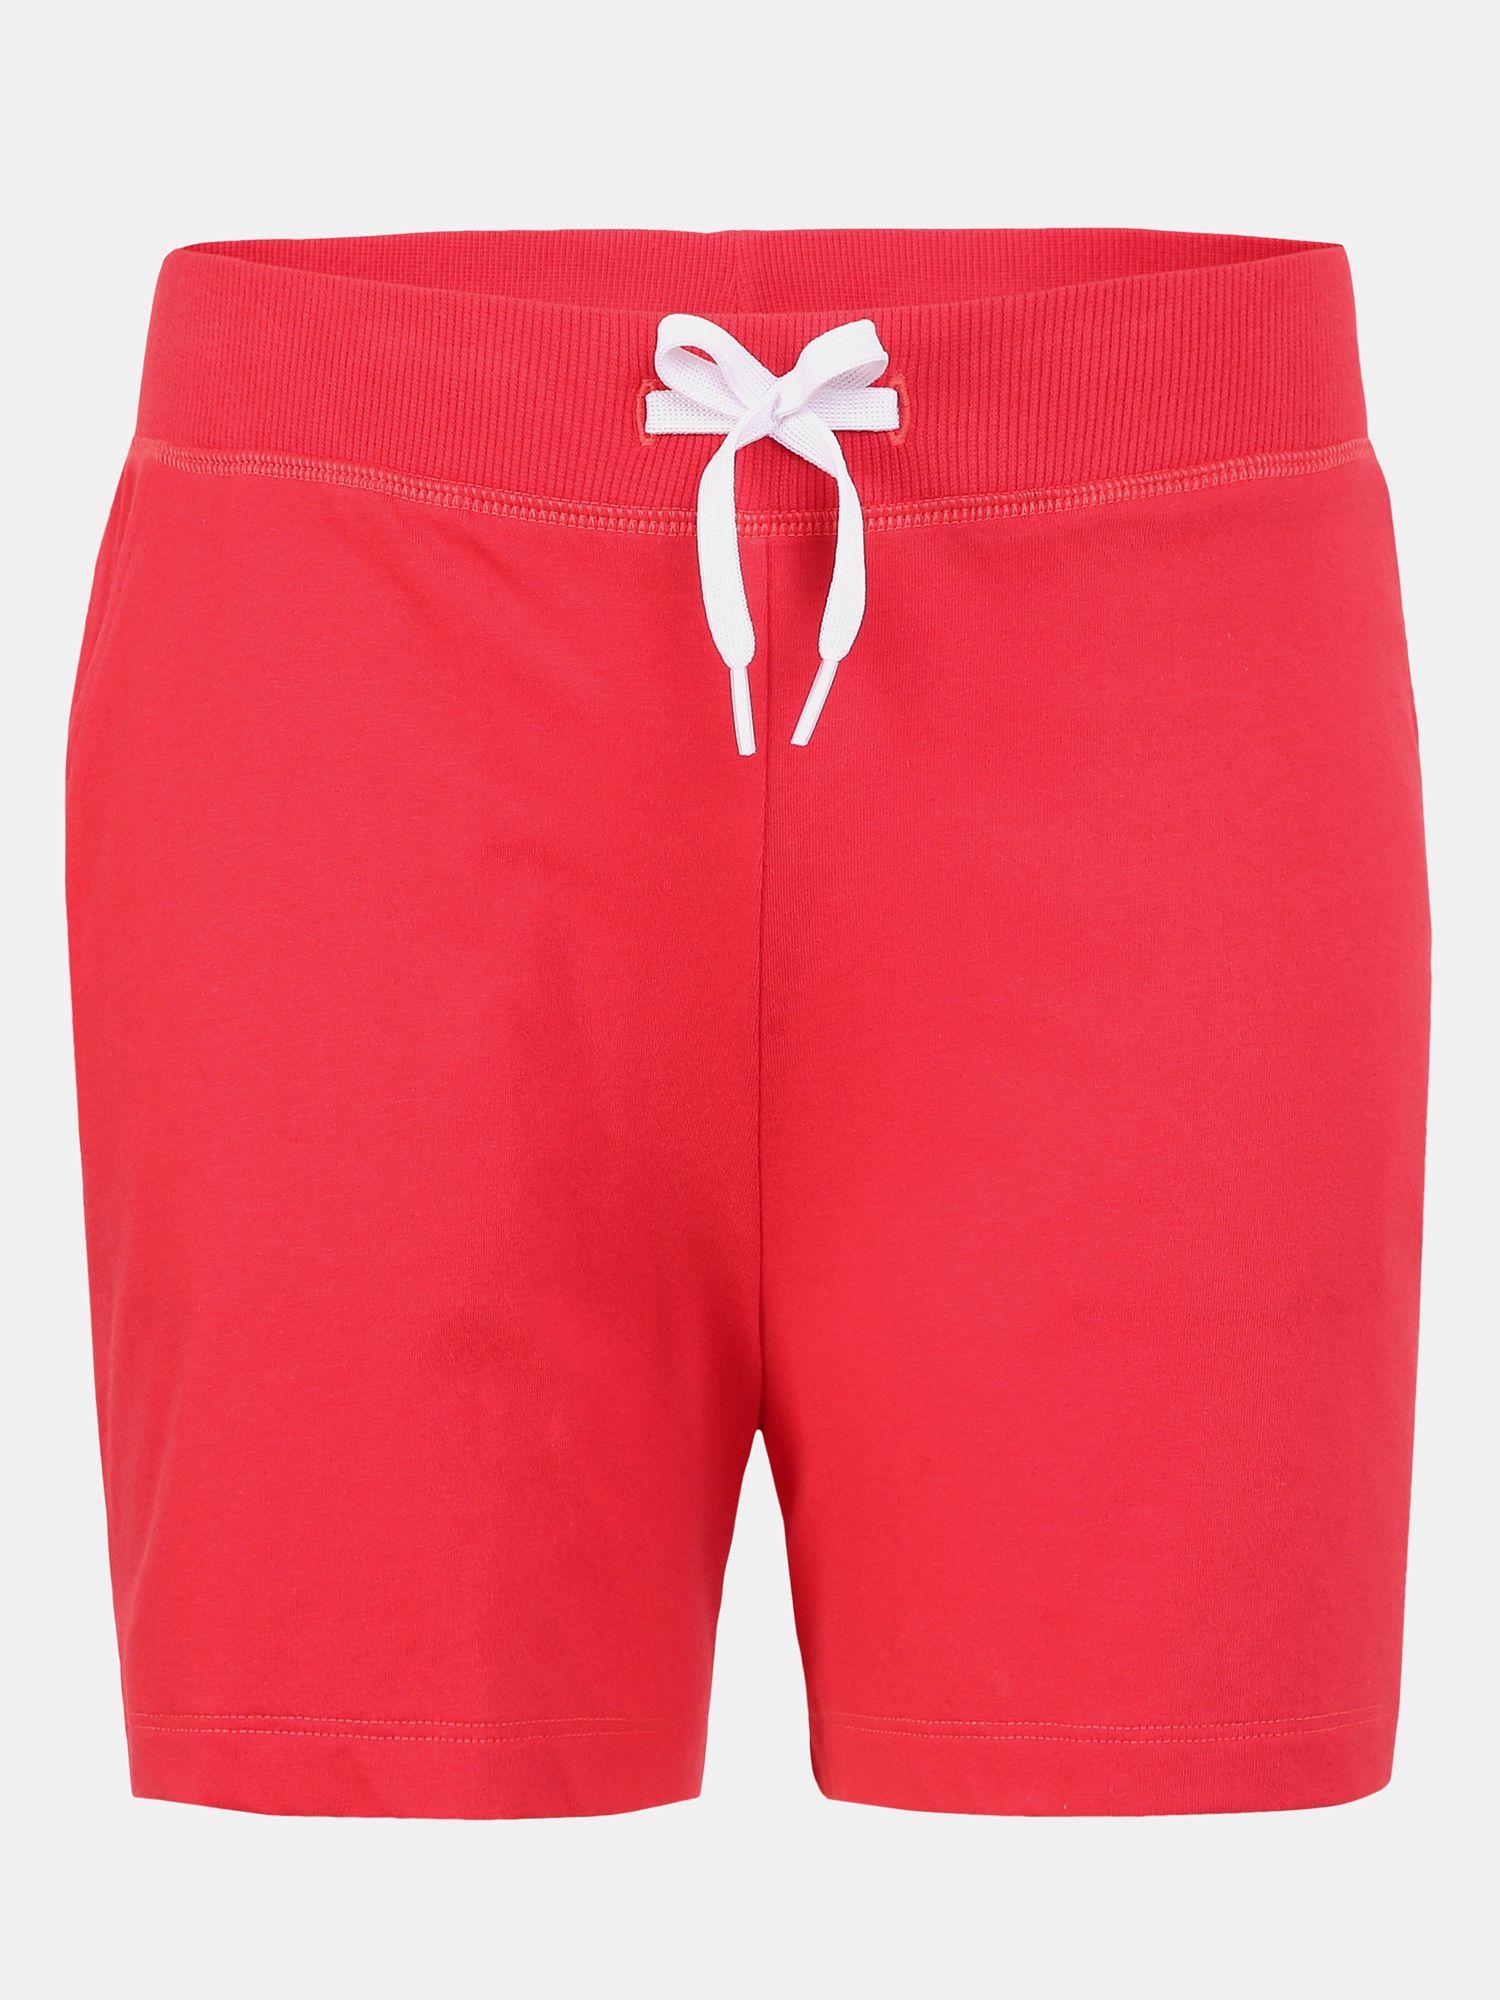 jockey ag63 cotton shorts for girls with side pockets & drawstring closure-red